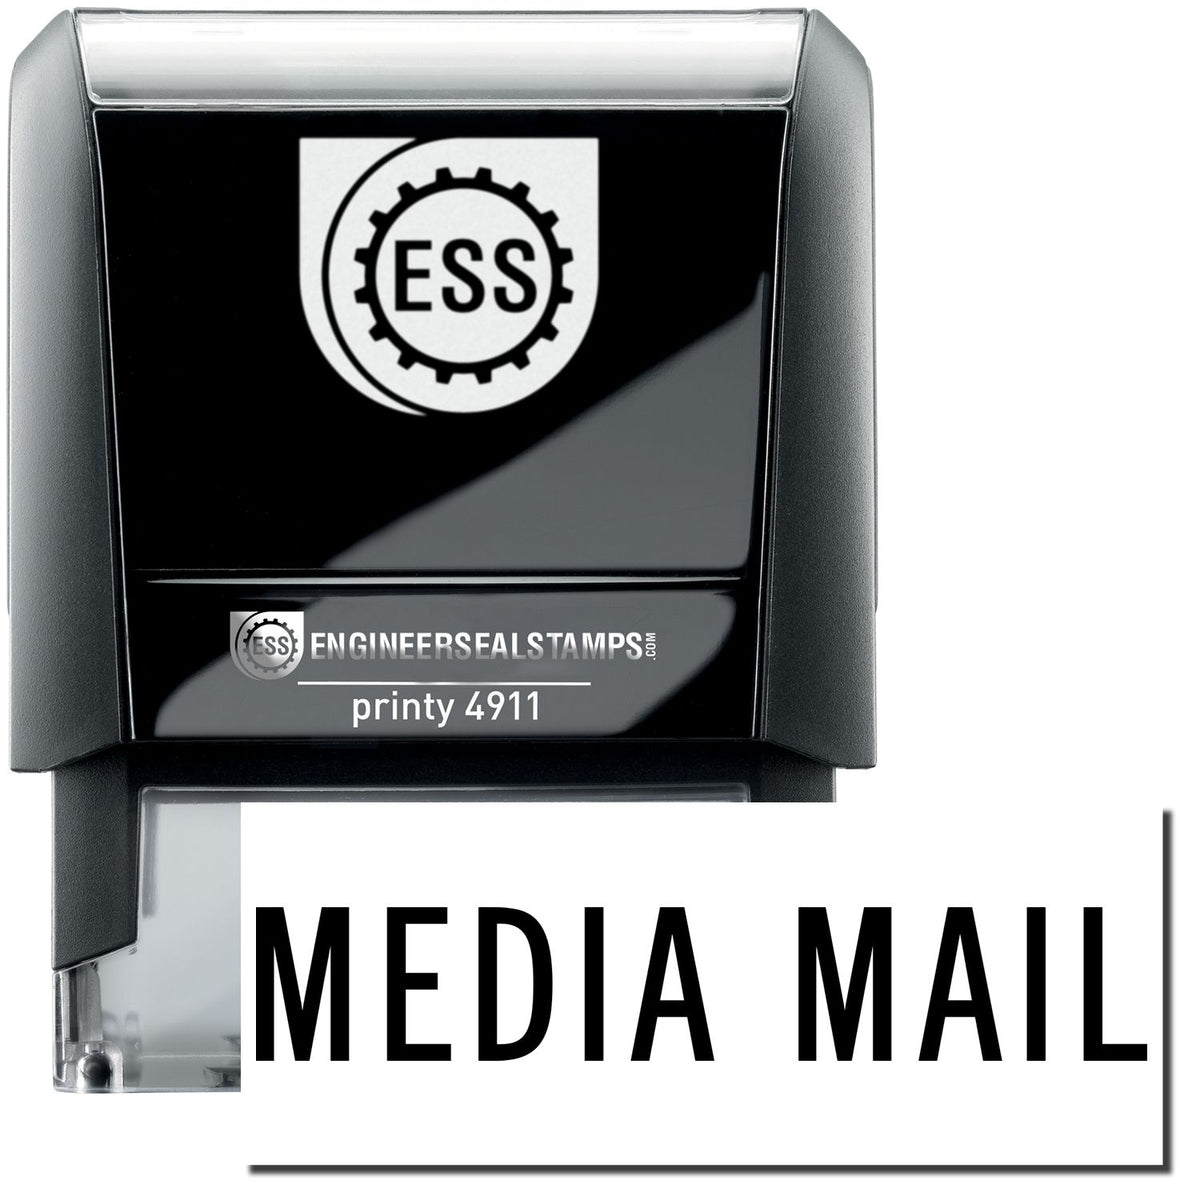 A self-inking stamp with a stamped image showing how the text &quot;MEDIA MAIL&quot; is displayed after stamping.